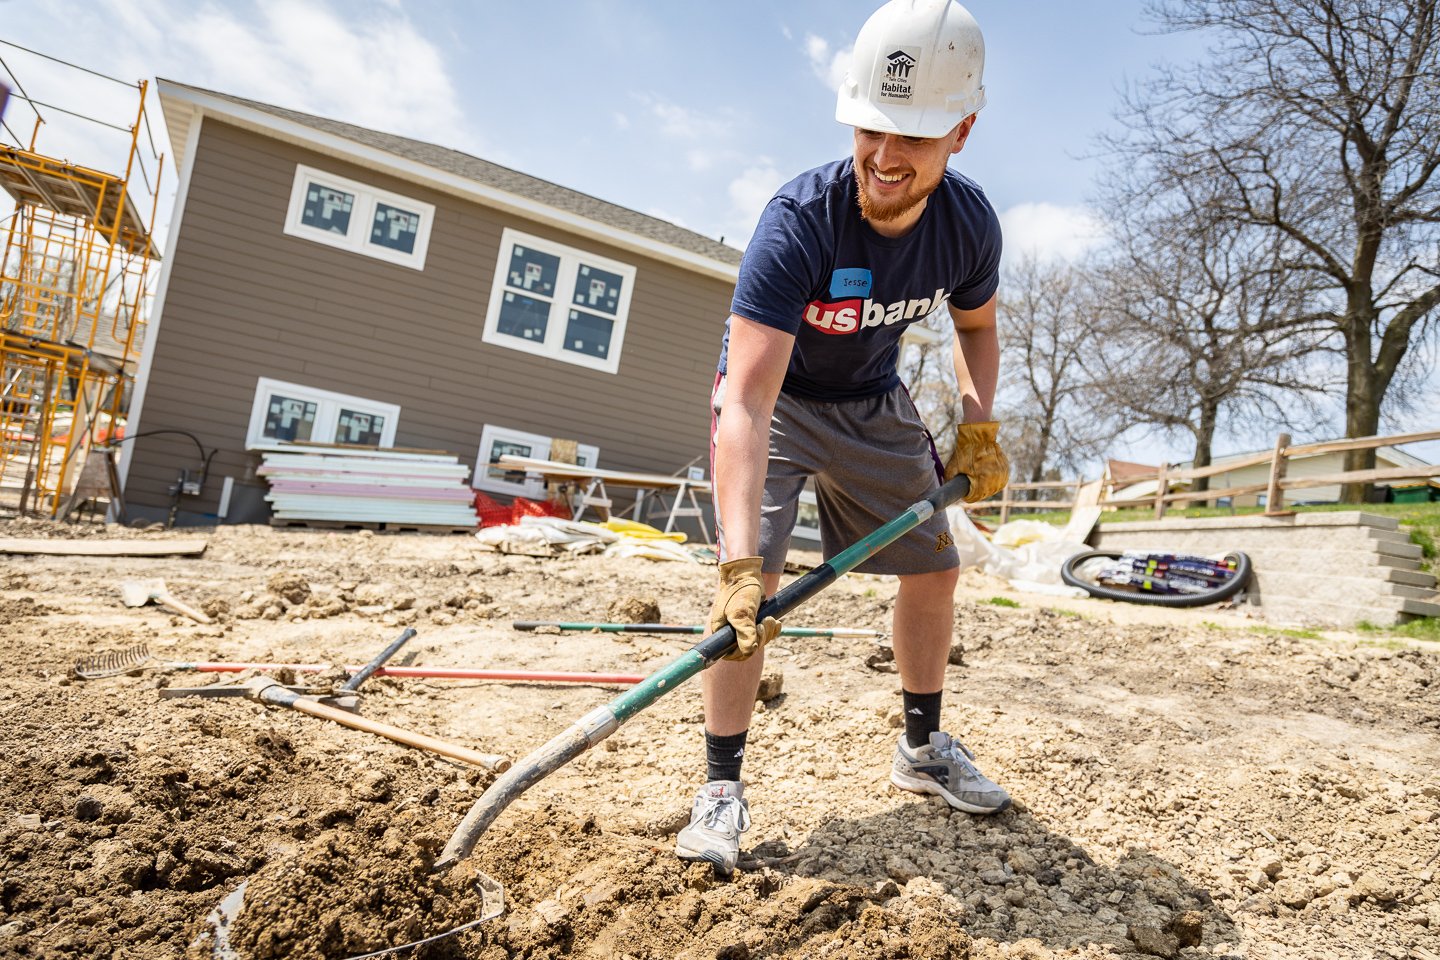 Jesse Mamaril in a US Bank shirt and construction hat and gloves, digging dirt on a build site.